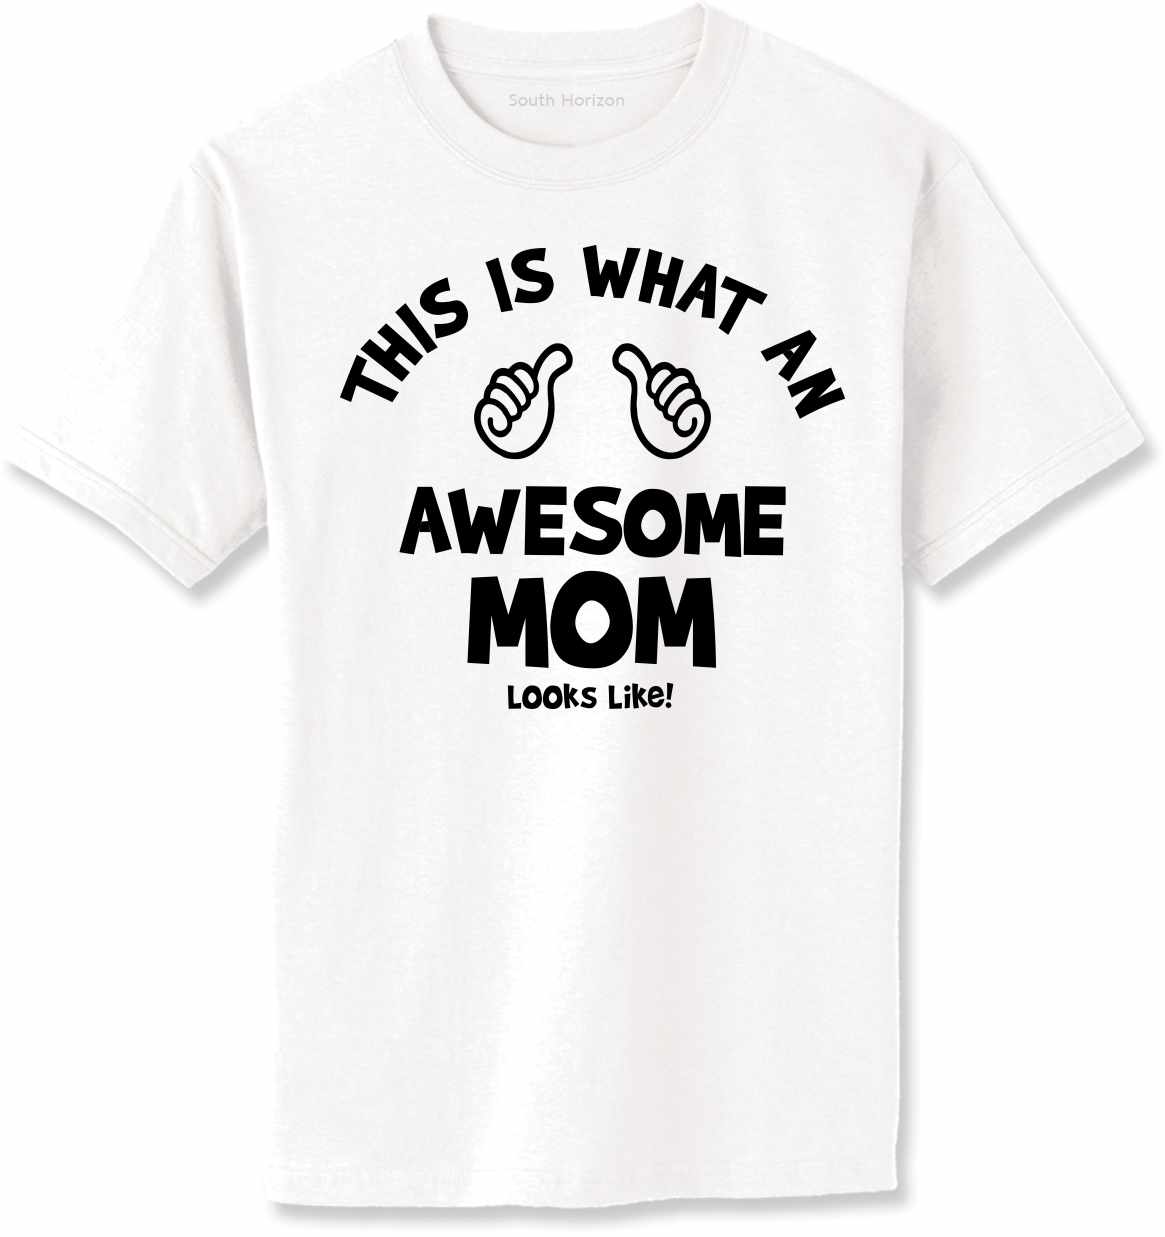 This Is What An Awesome MOM Looks Like Adult T-Shirt (#1092-1)